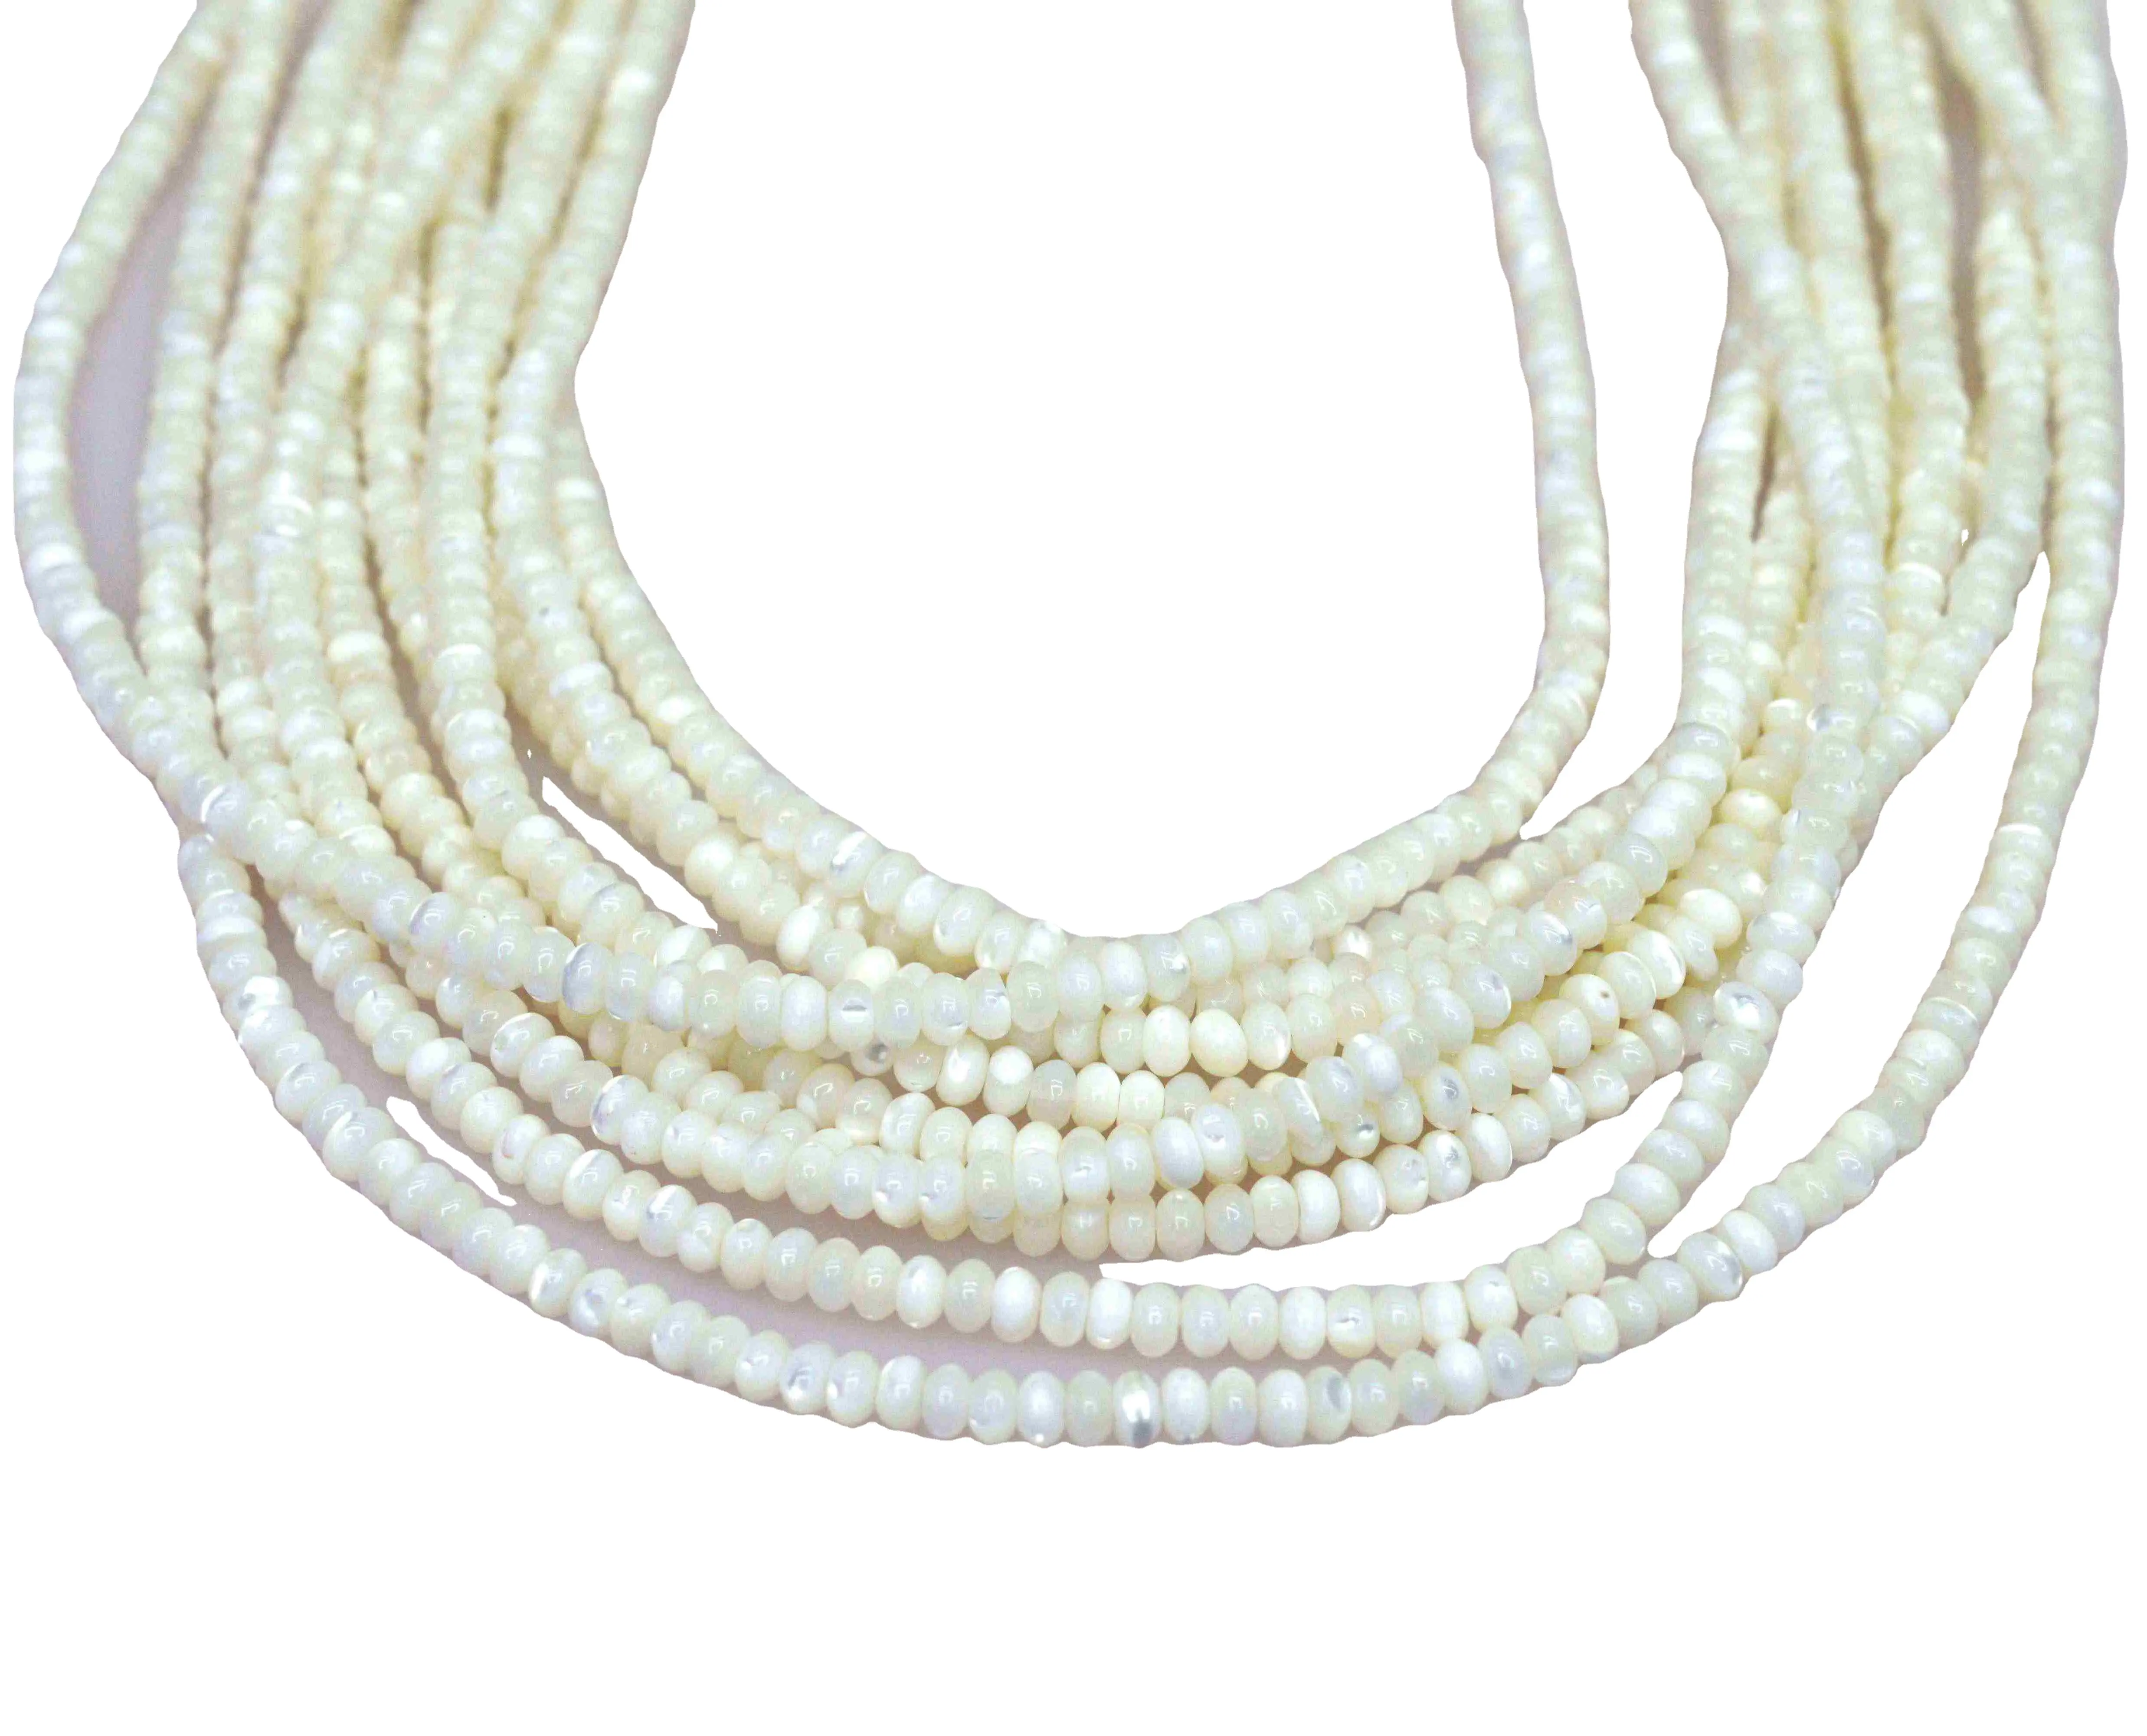 Wholesale Natural Ocean Trochidae White Vane Flat Round Beads Sea Shell Conch Set Classic DIY Jewelry Accessory Making